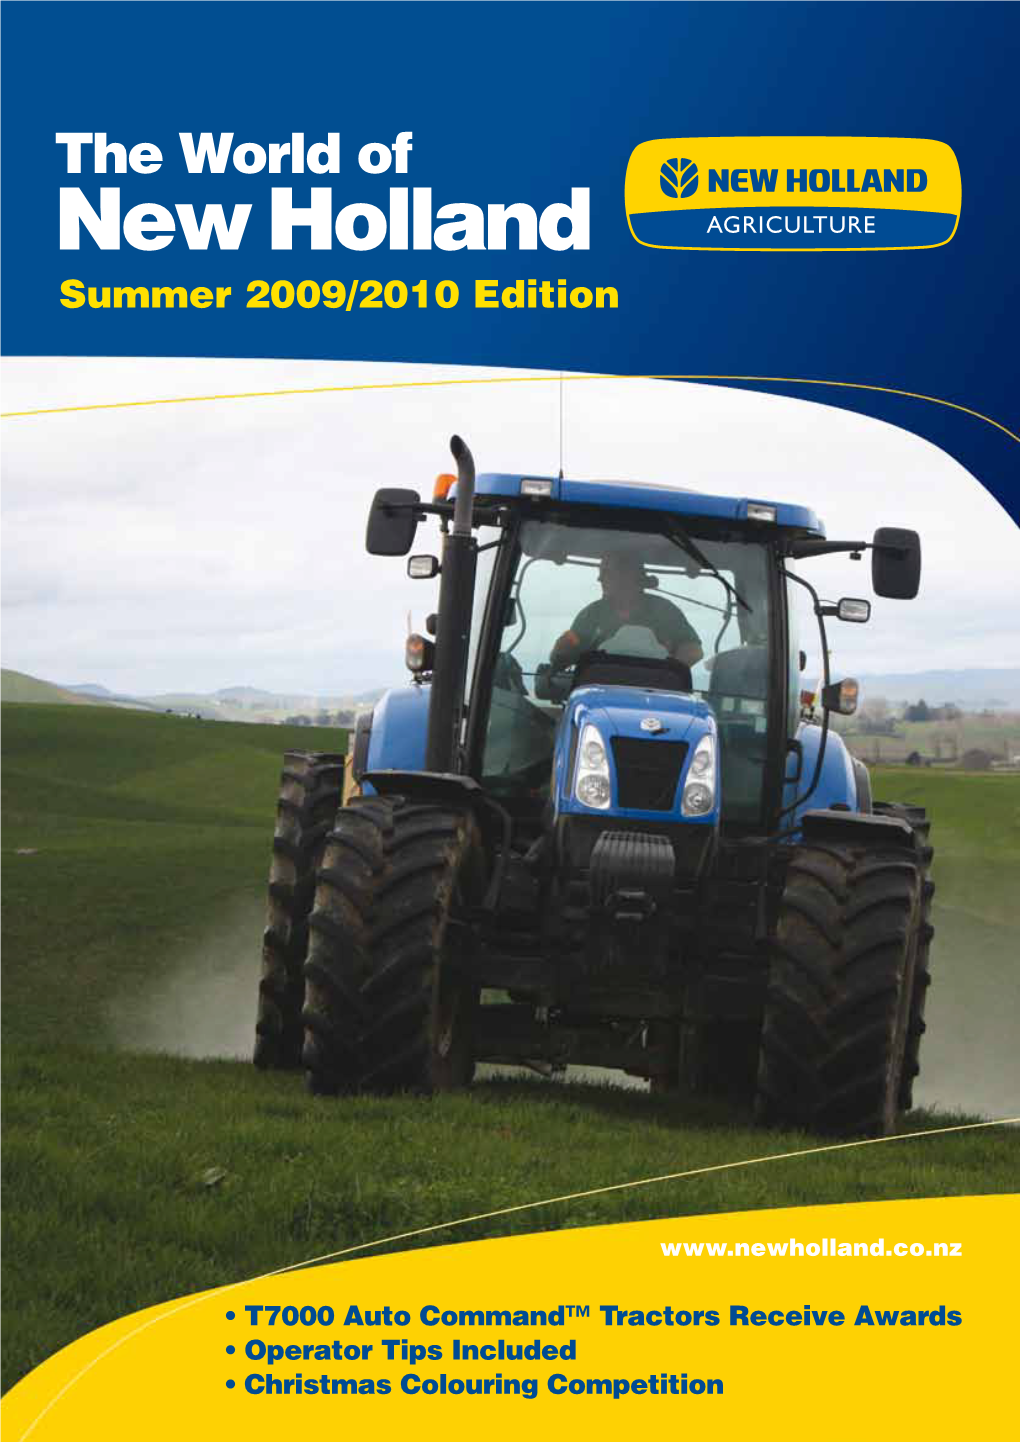 The World of New Holland Summer 2009/2010 Edition